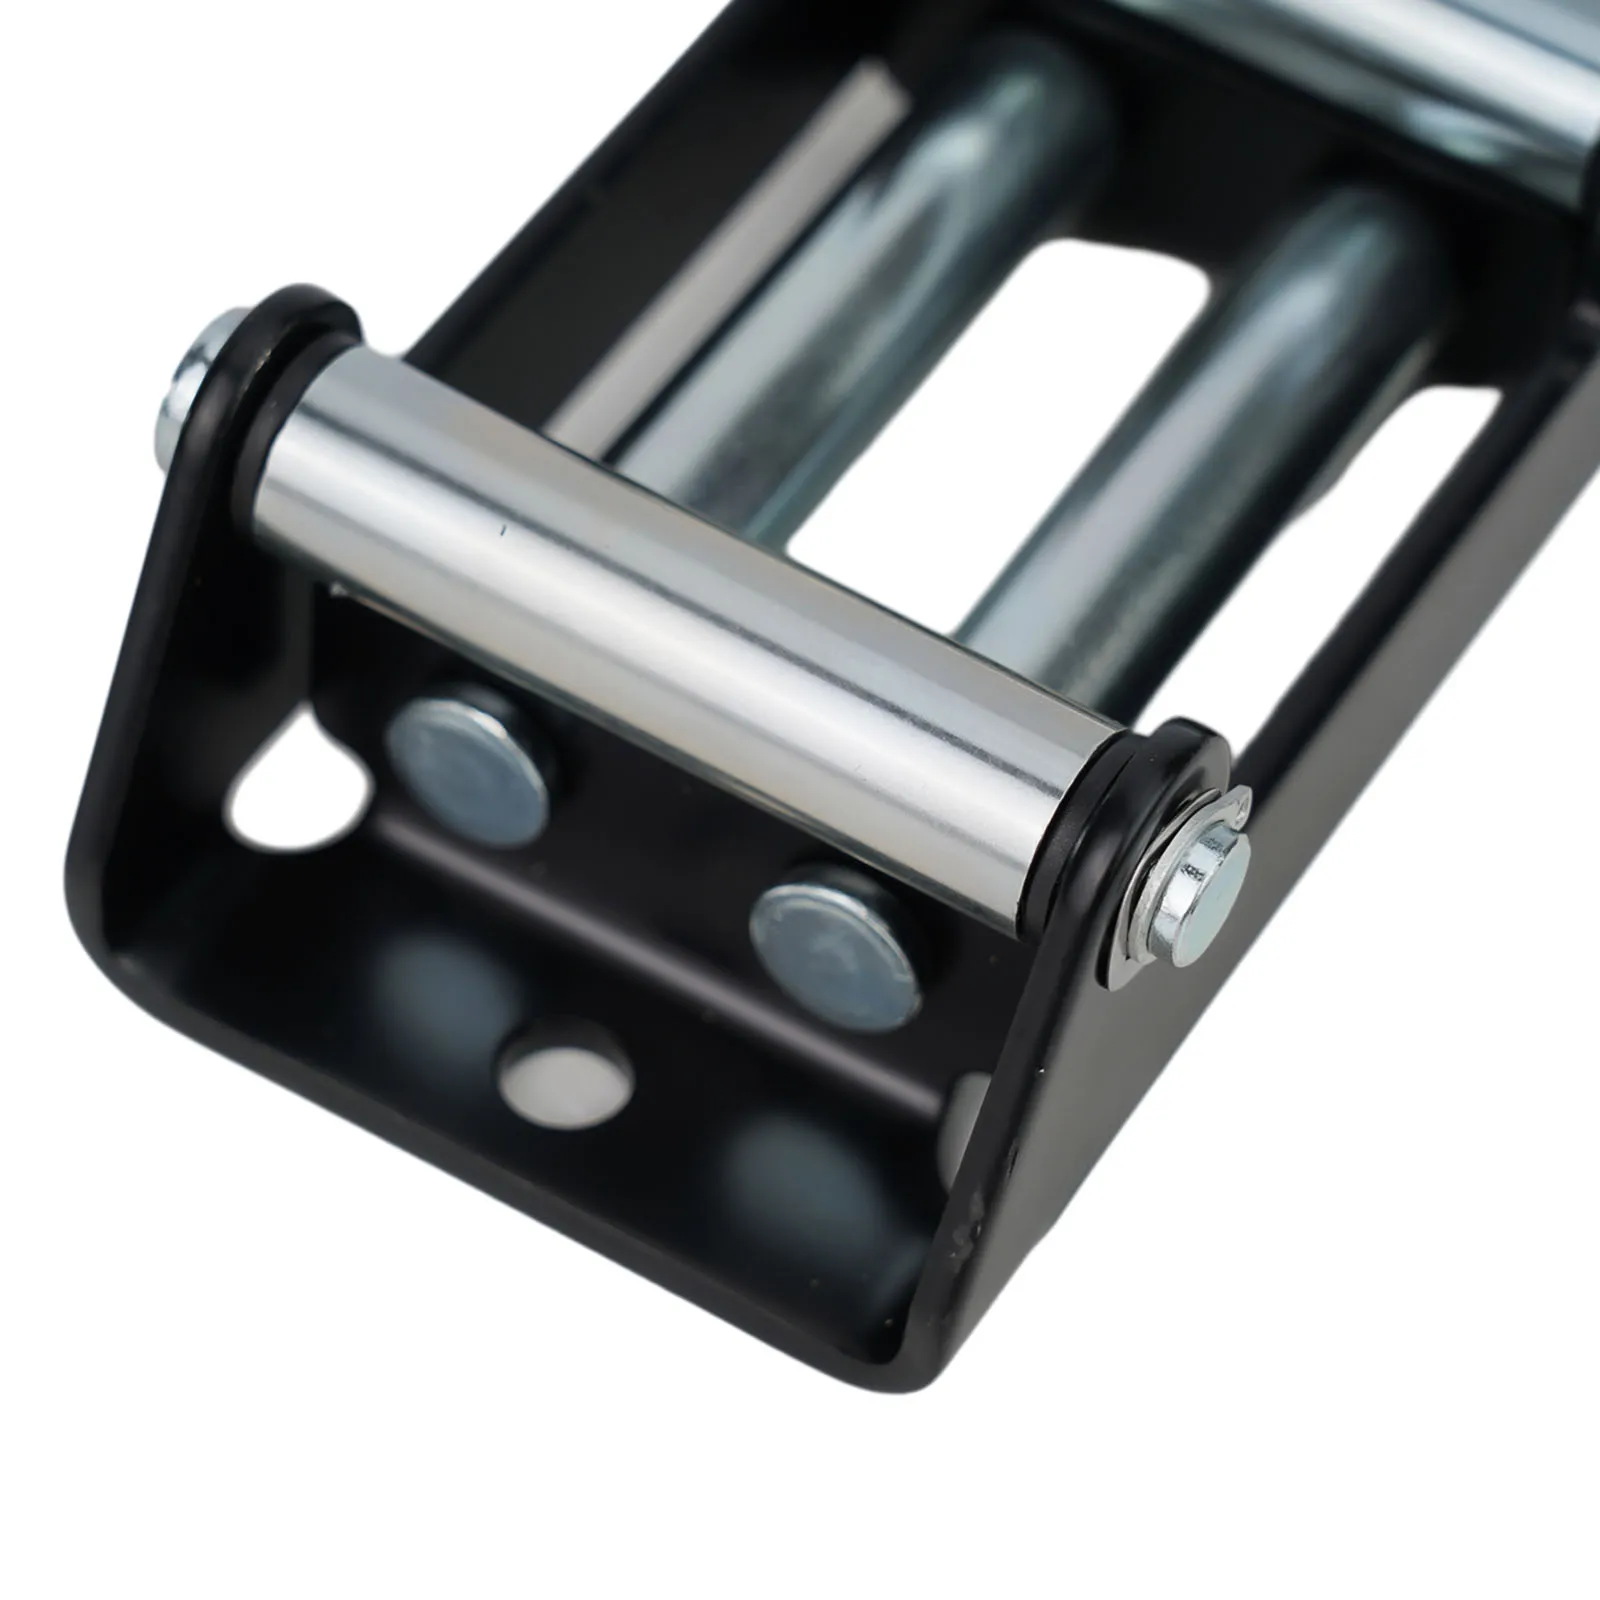 

Premium Roller Fairlead for ATV UTV Winches Composite Bushings Smooth Operation at Extreme Angles Ensures Cable Protection